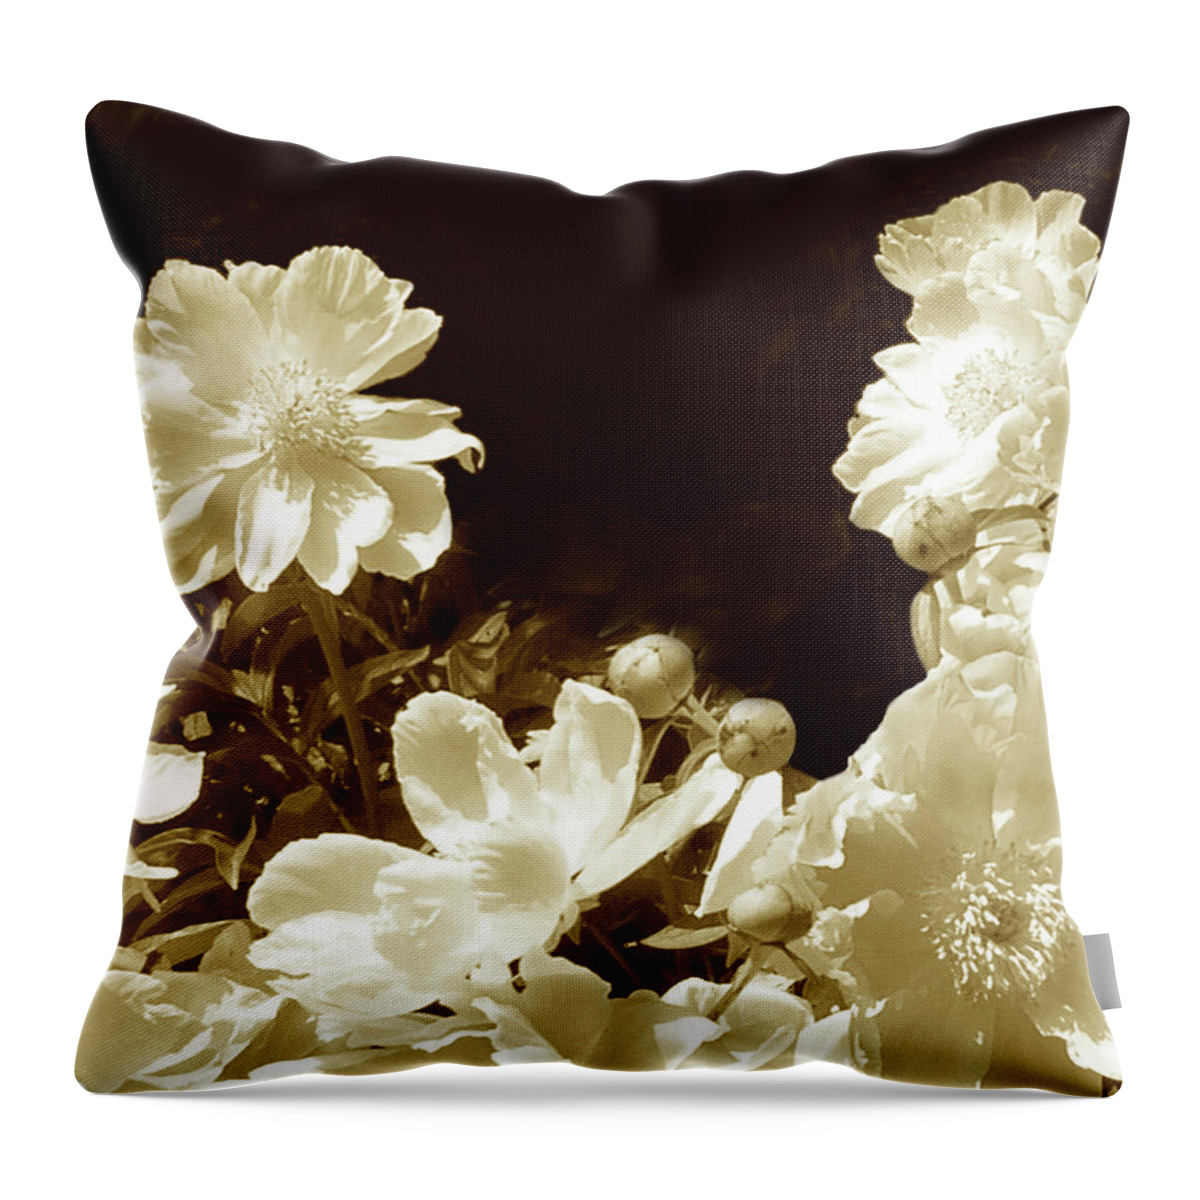 Modern Throw Pillow featuring the photograph Sepia Peonies IIi by Chariklia Zarris